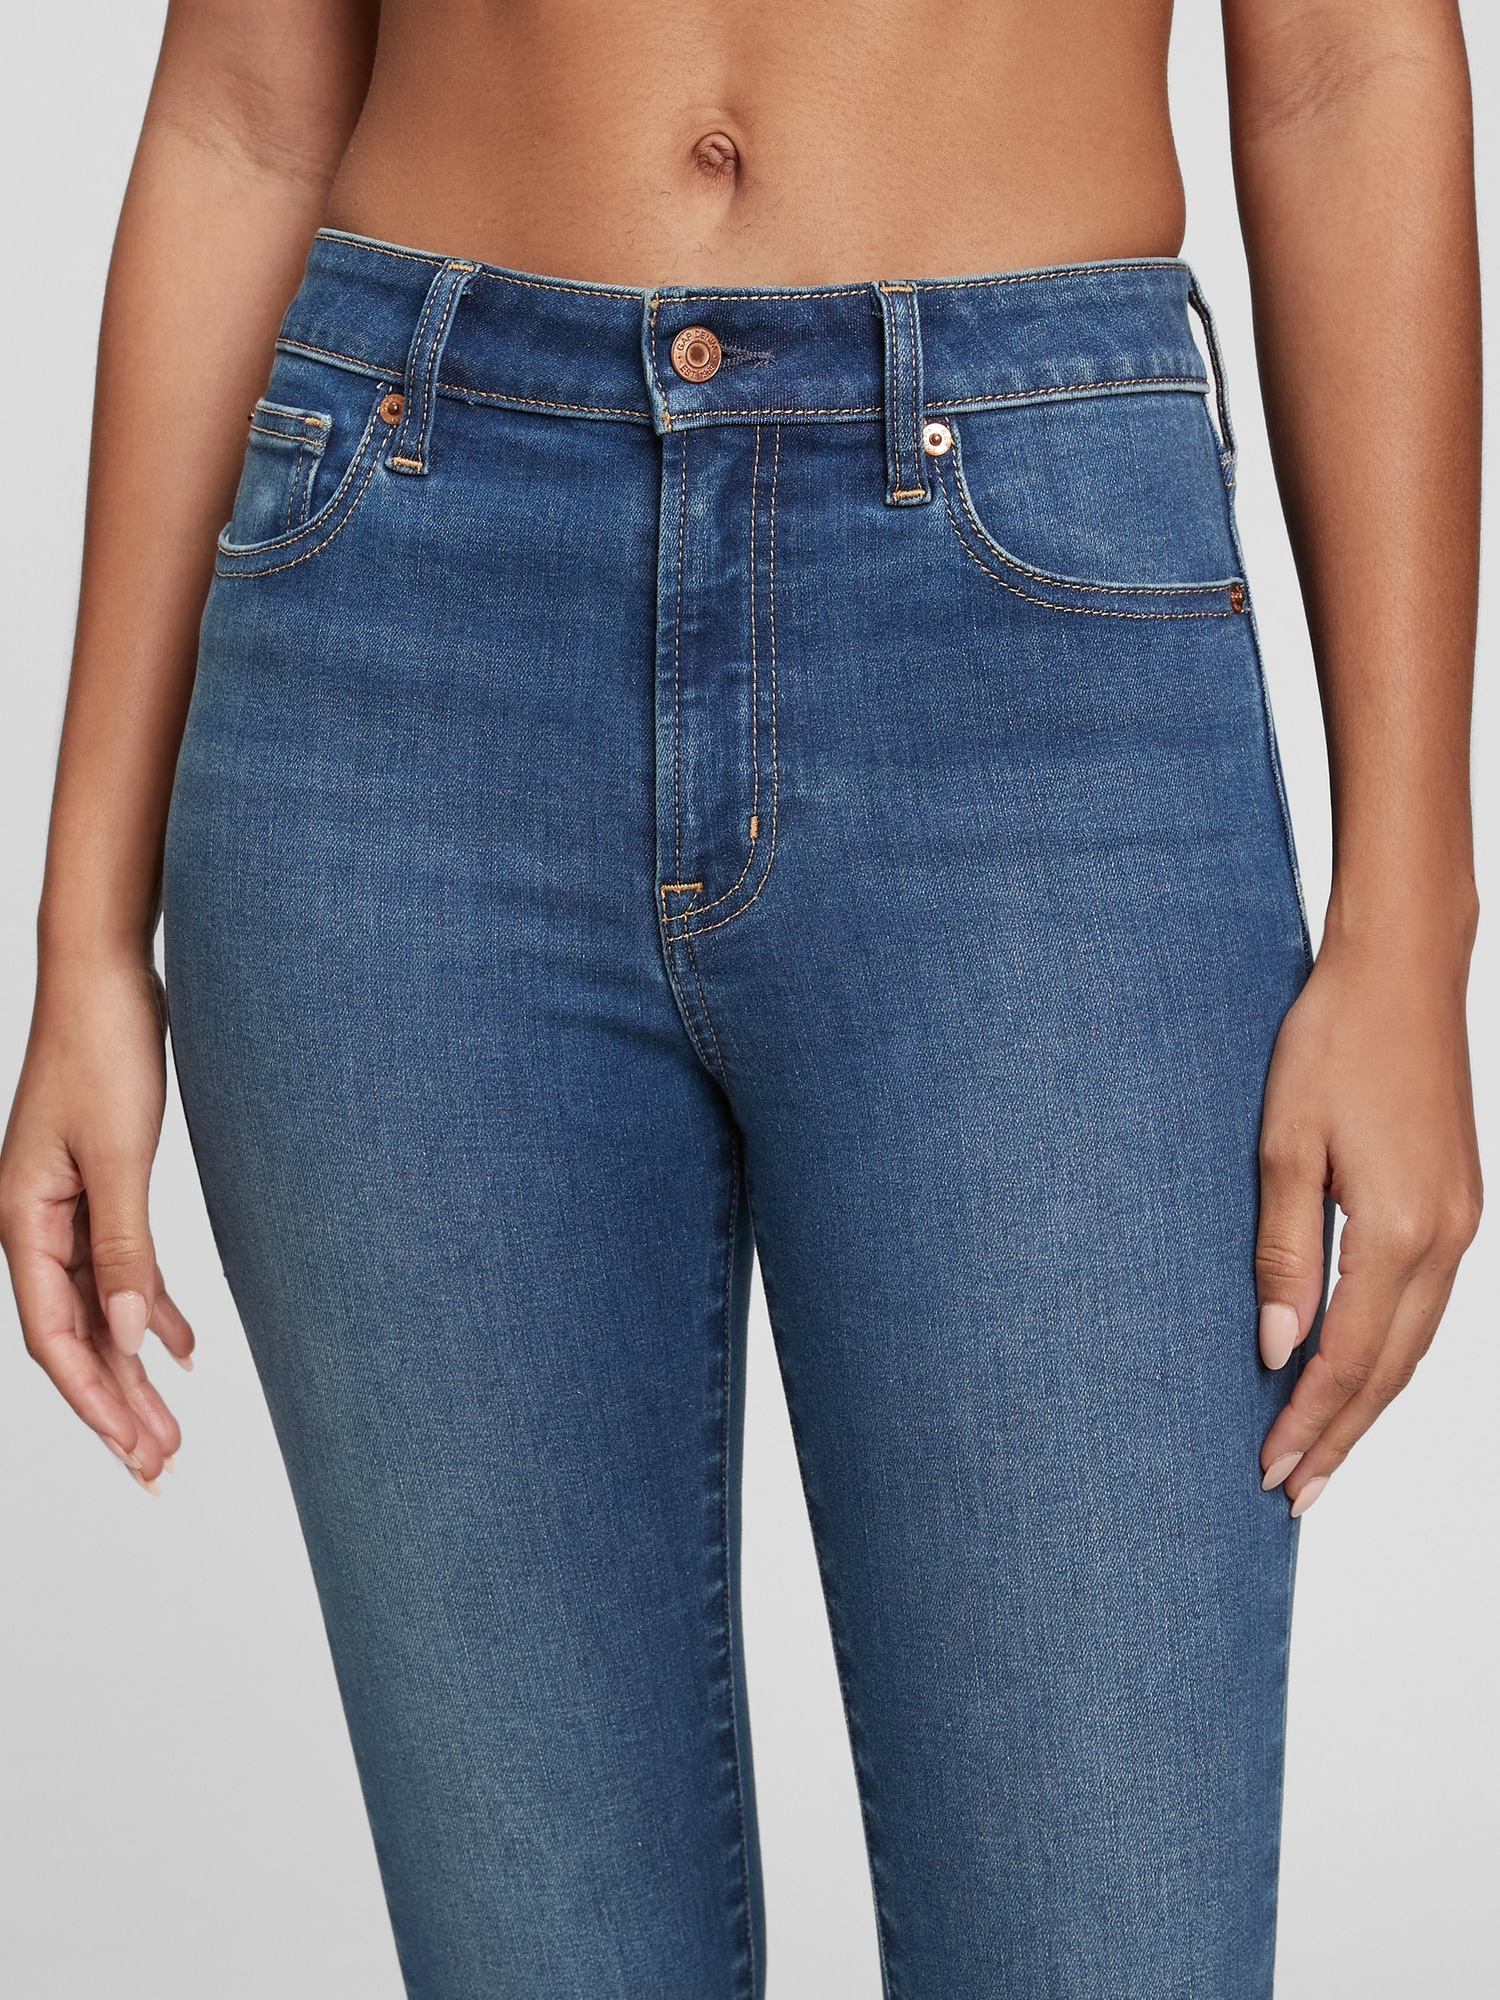 High Rise Ace Jeans with Washwell | Gap